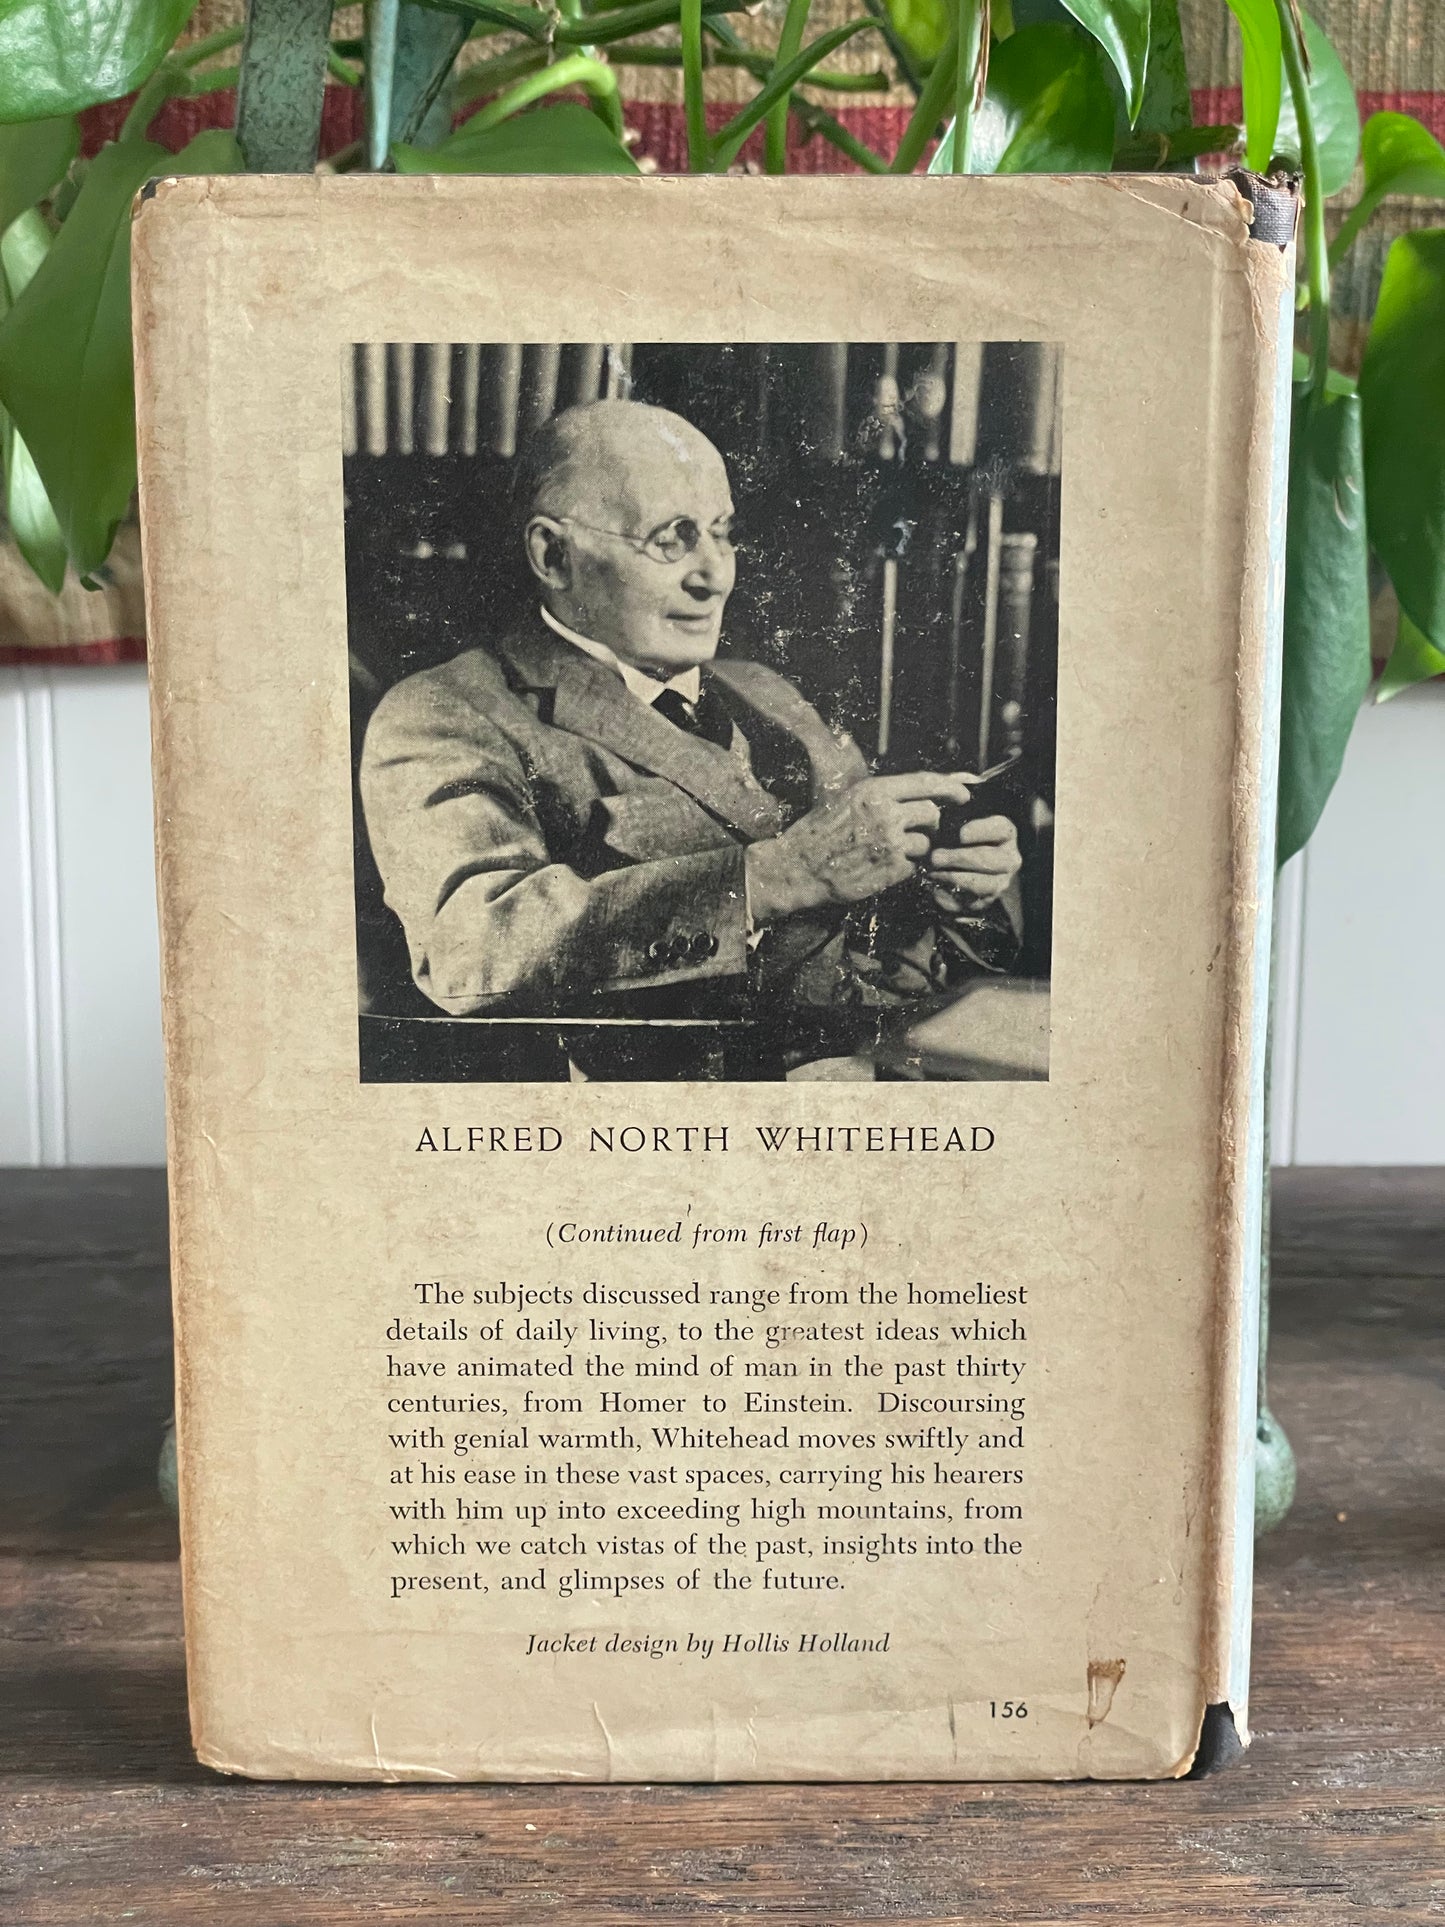 Dialogues of Alfred North Whitehead (1954)